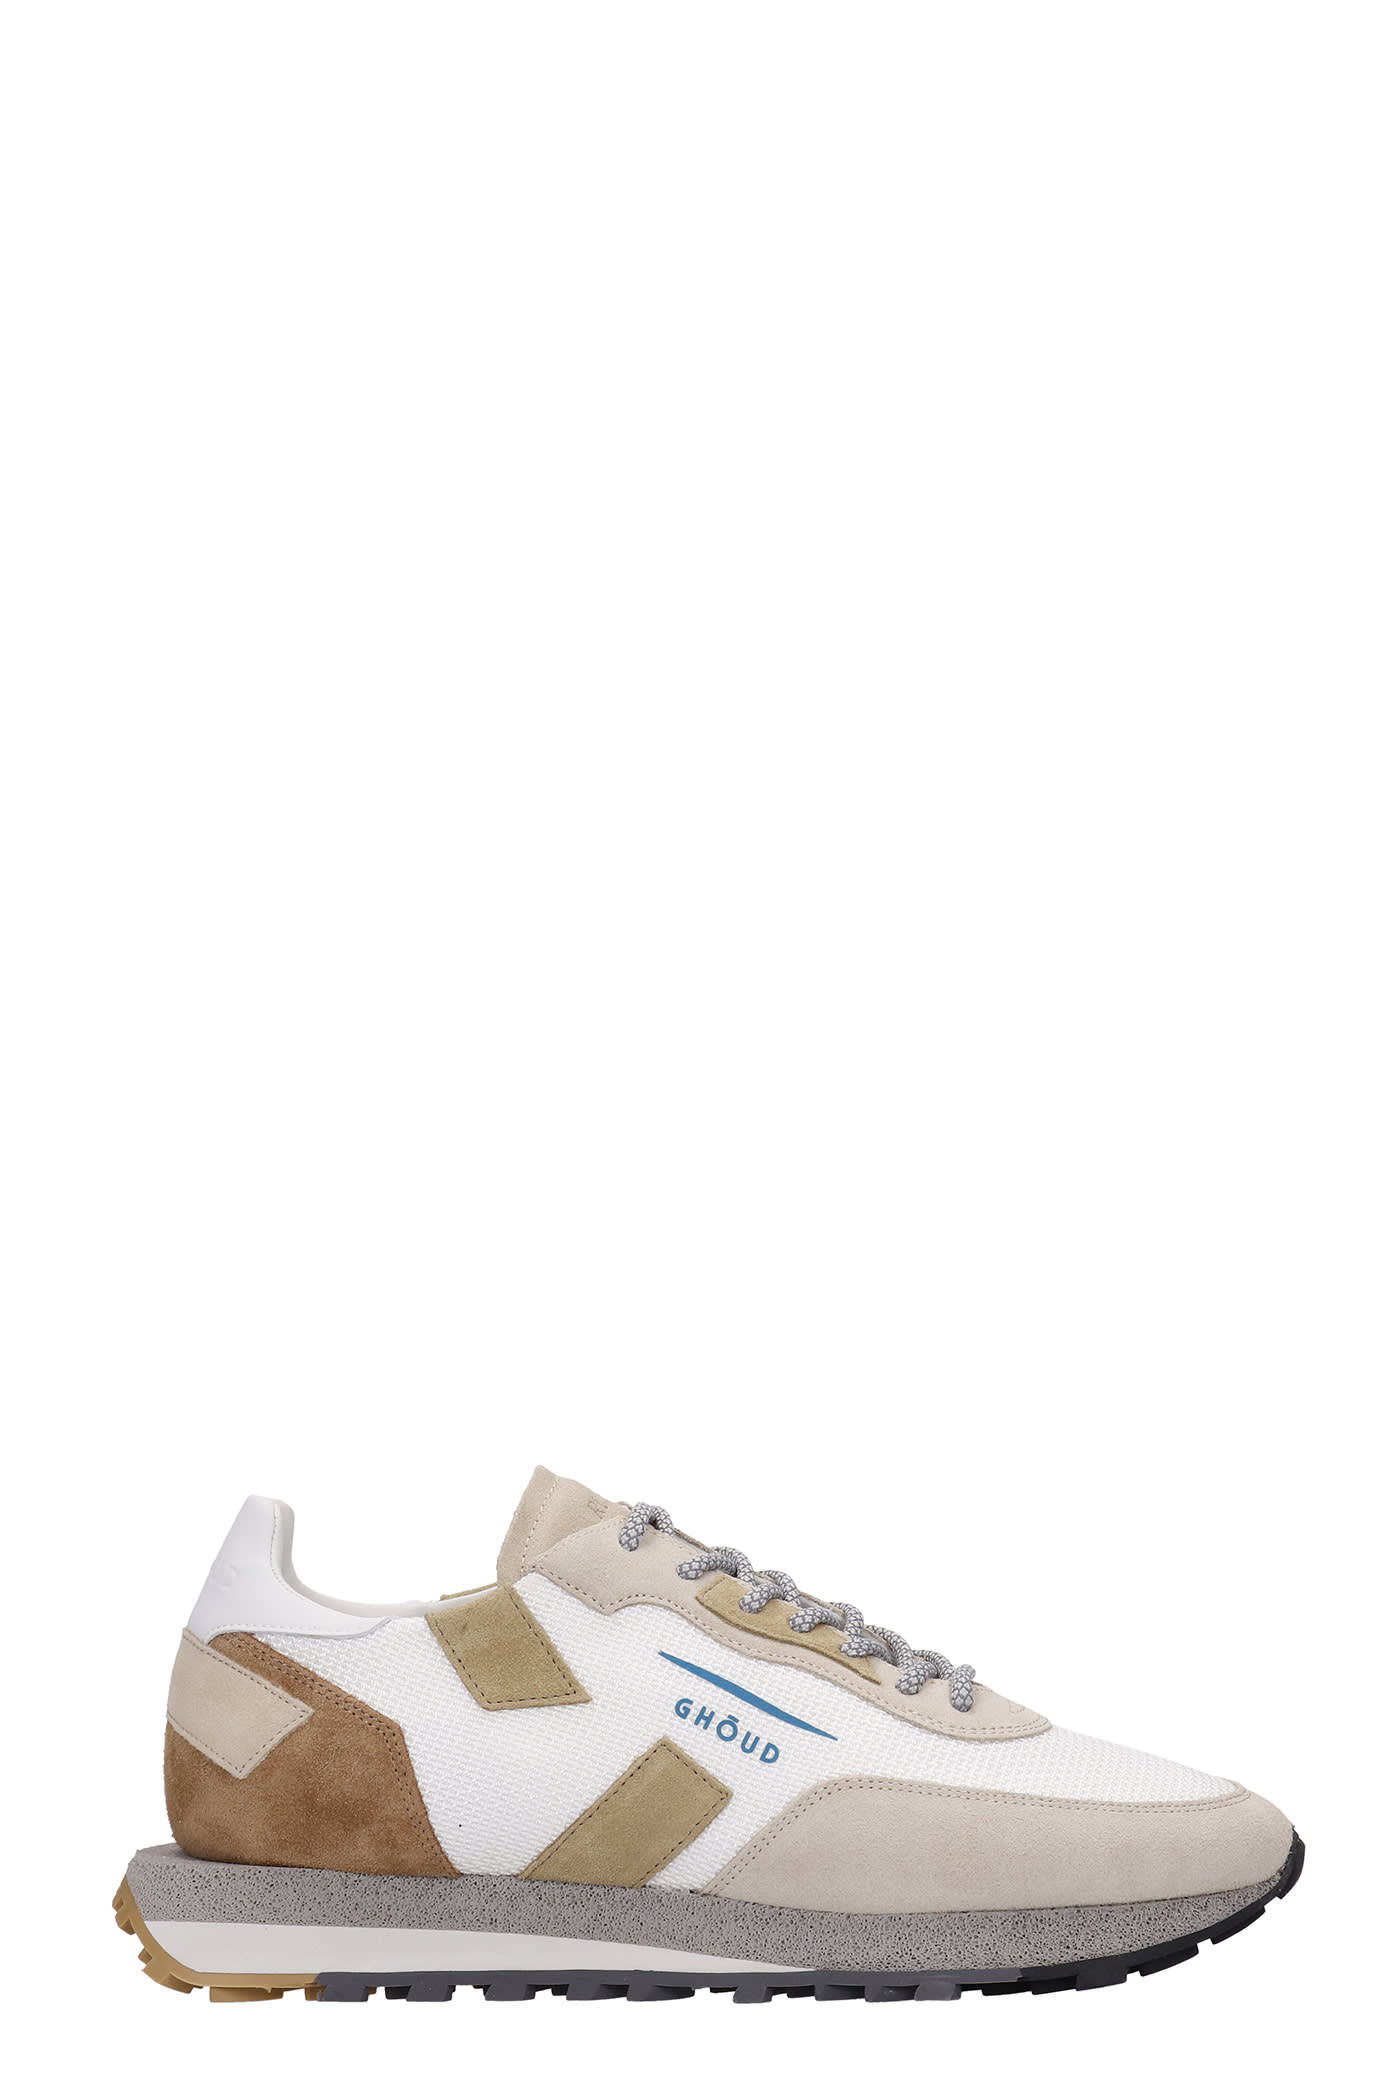 GHOUD Rush Sneakers In Beige Suede And Fabric